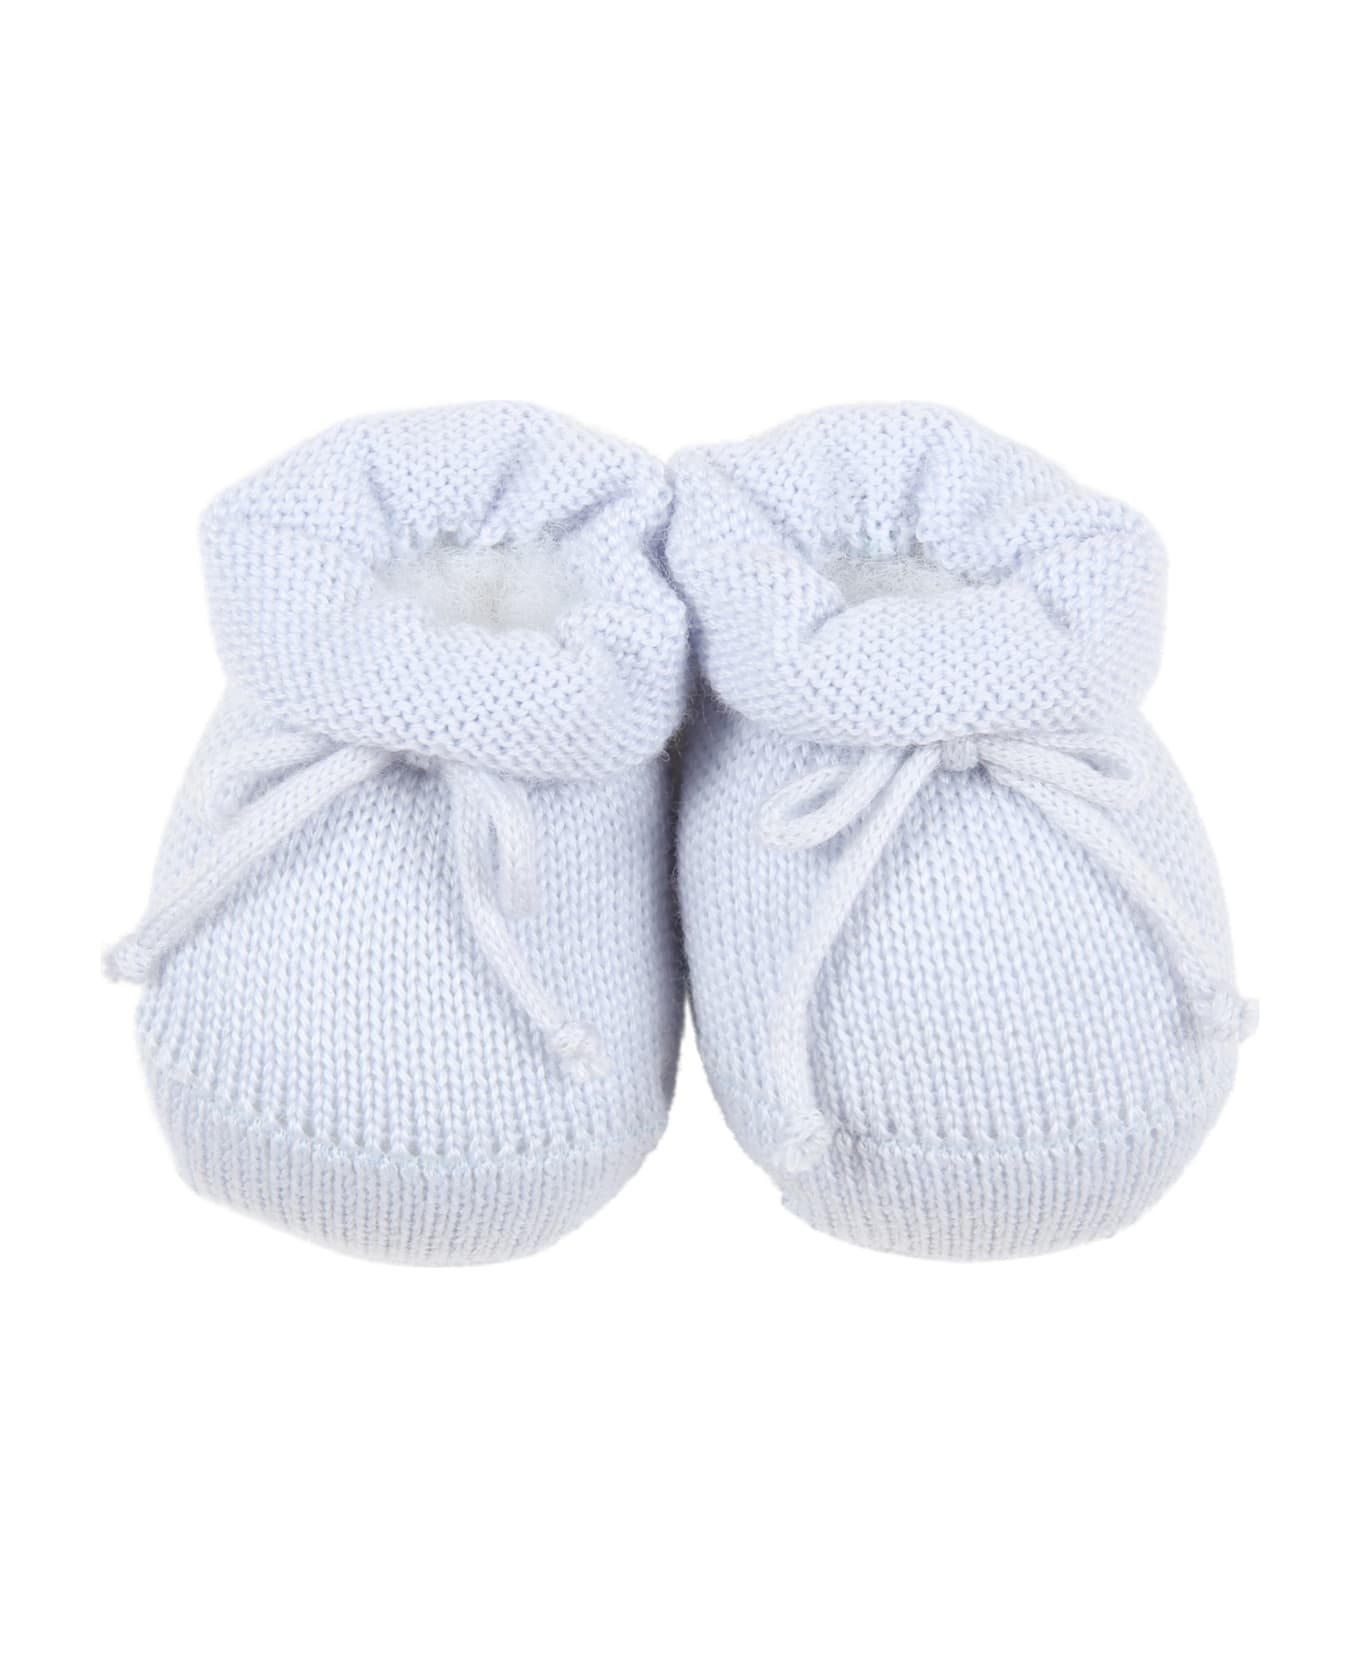 Story Loris Light-blue Bootee For Baby Boy - Light Blue アクセサリー＆ギフト